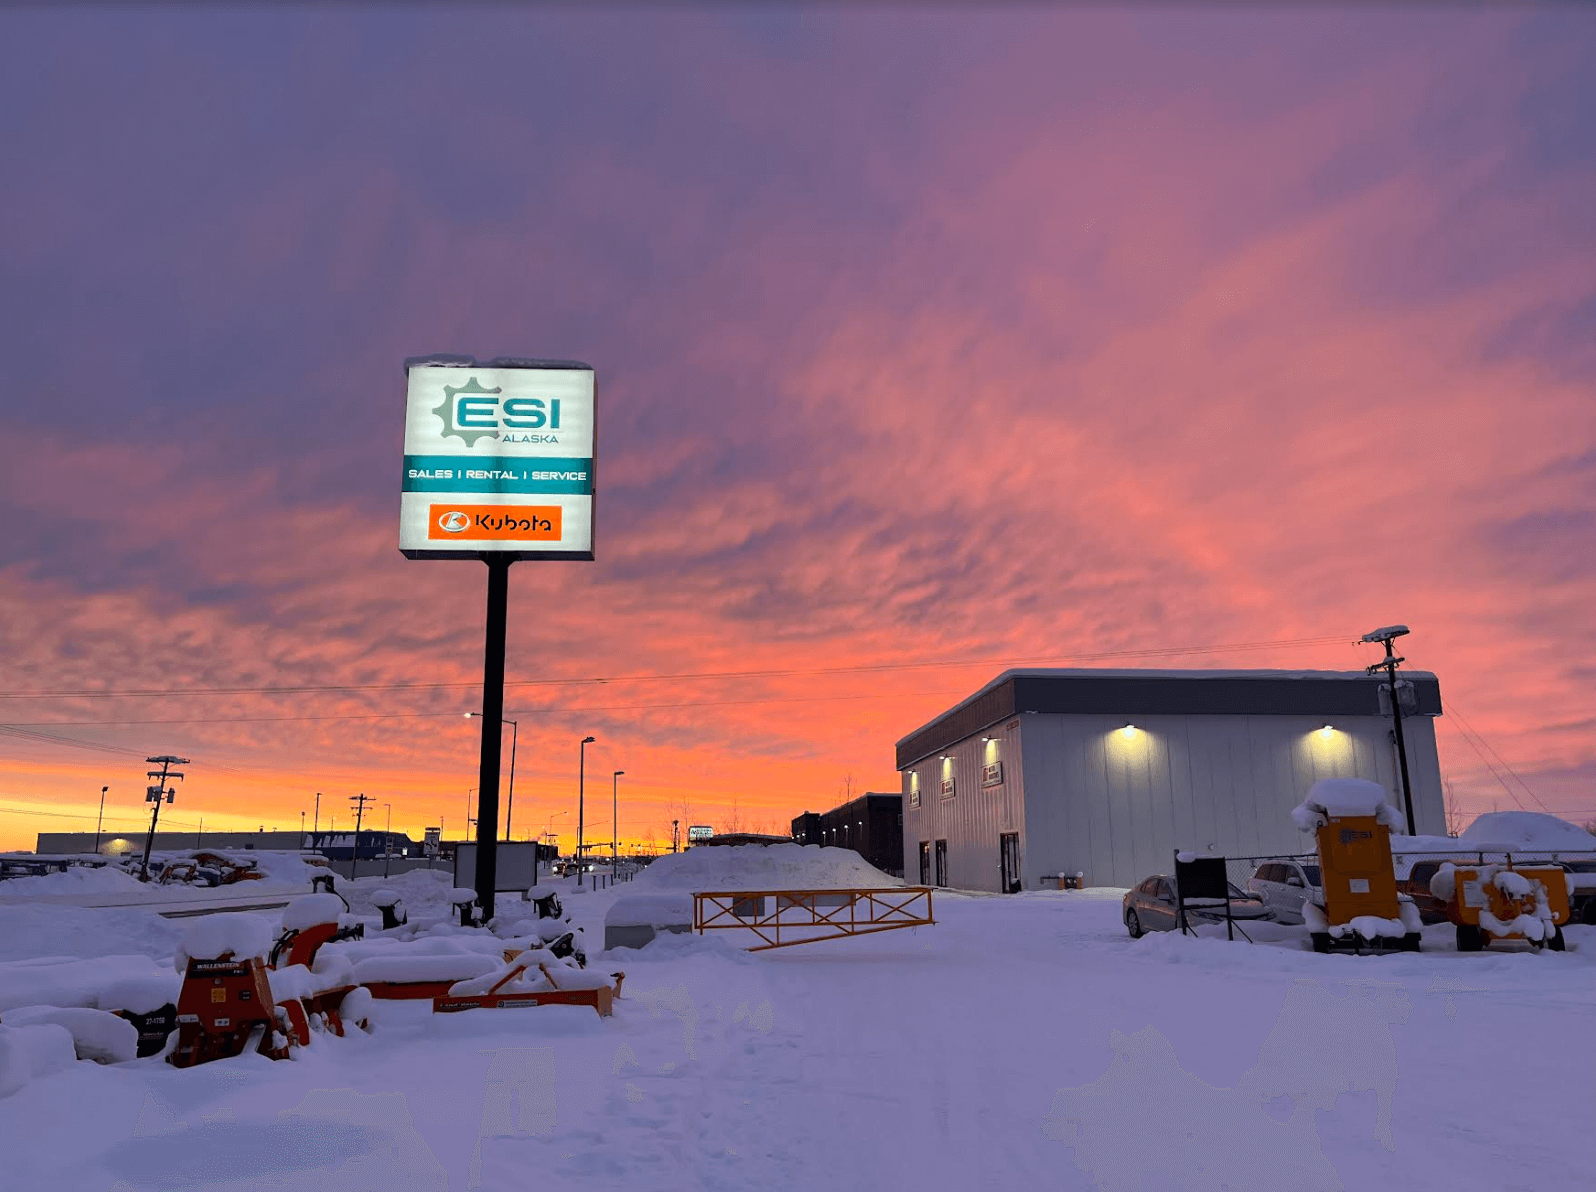 Equipment Source Inc. Becomes a Trusted Source in Alaska Thanks to Support from Locals